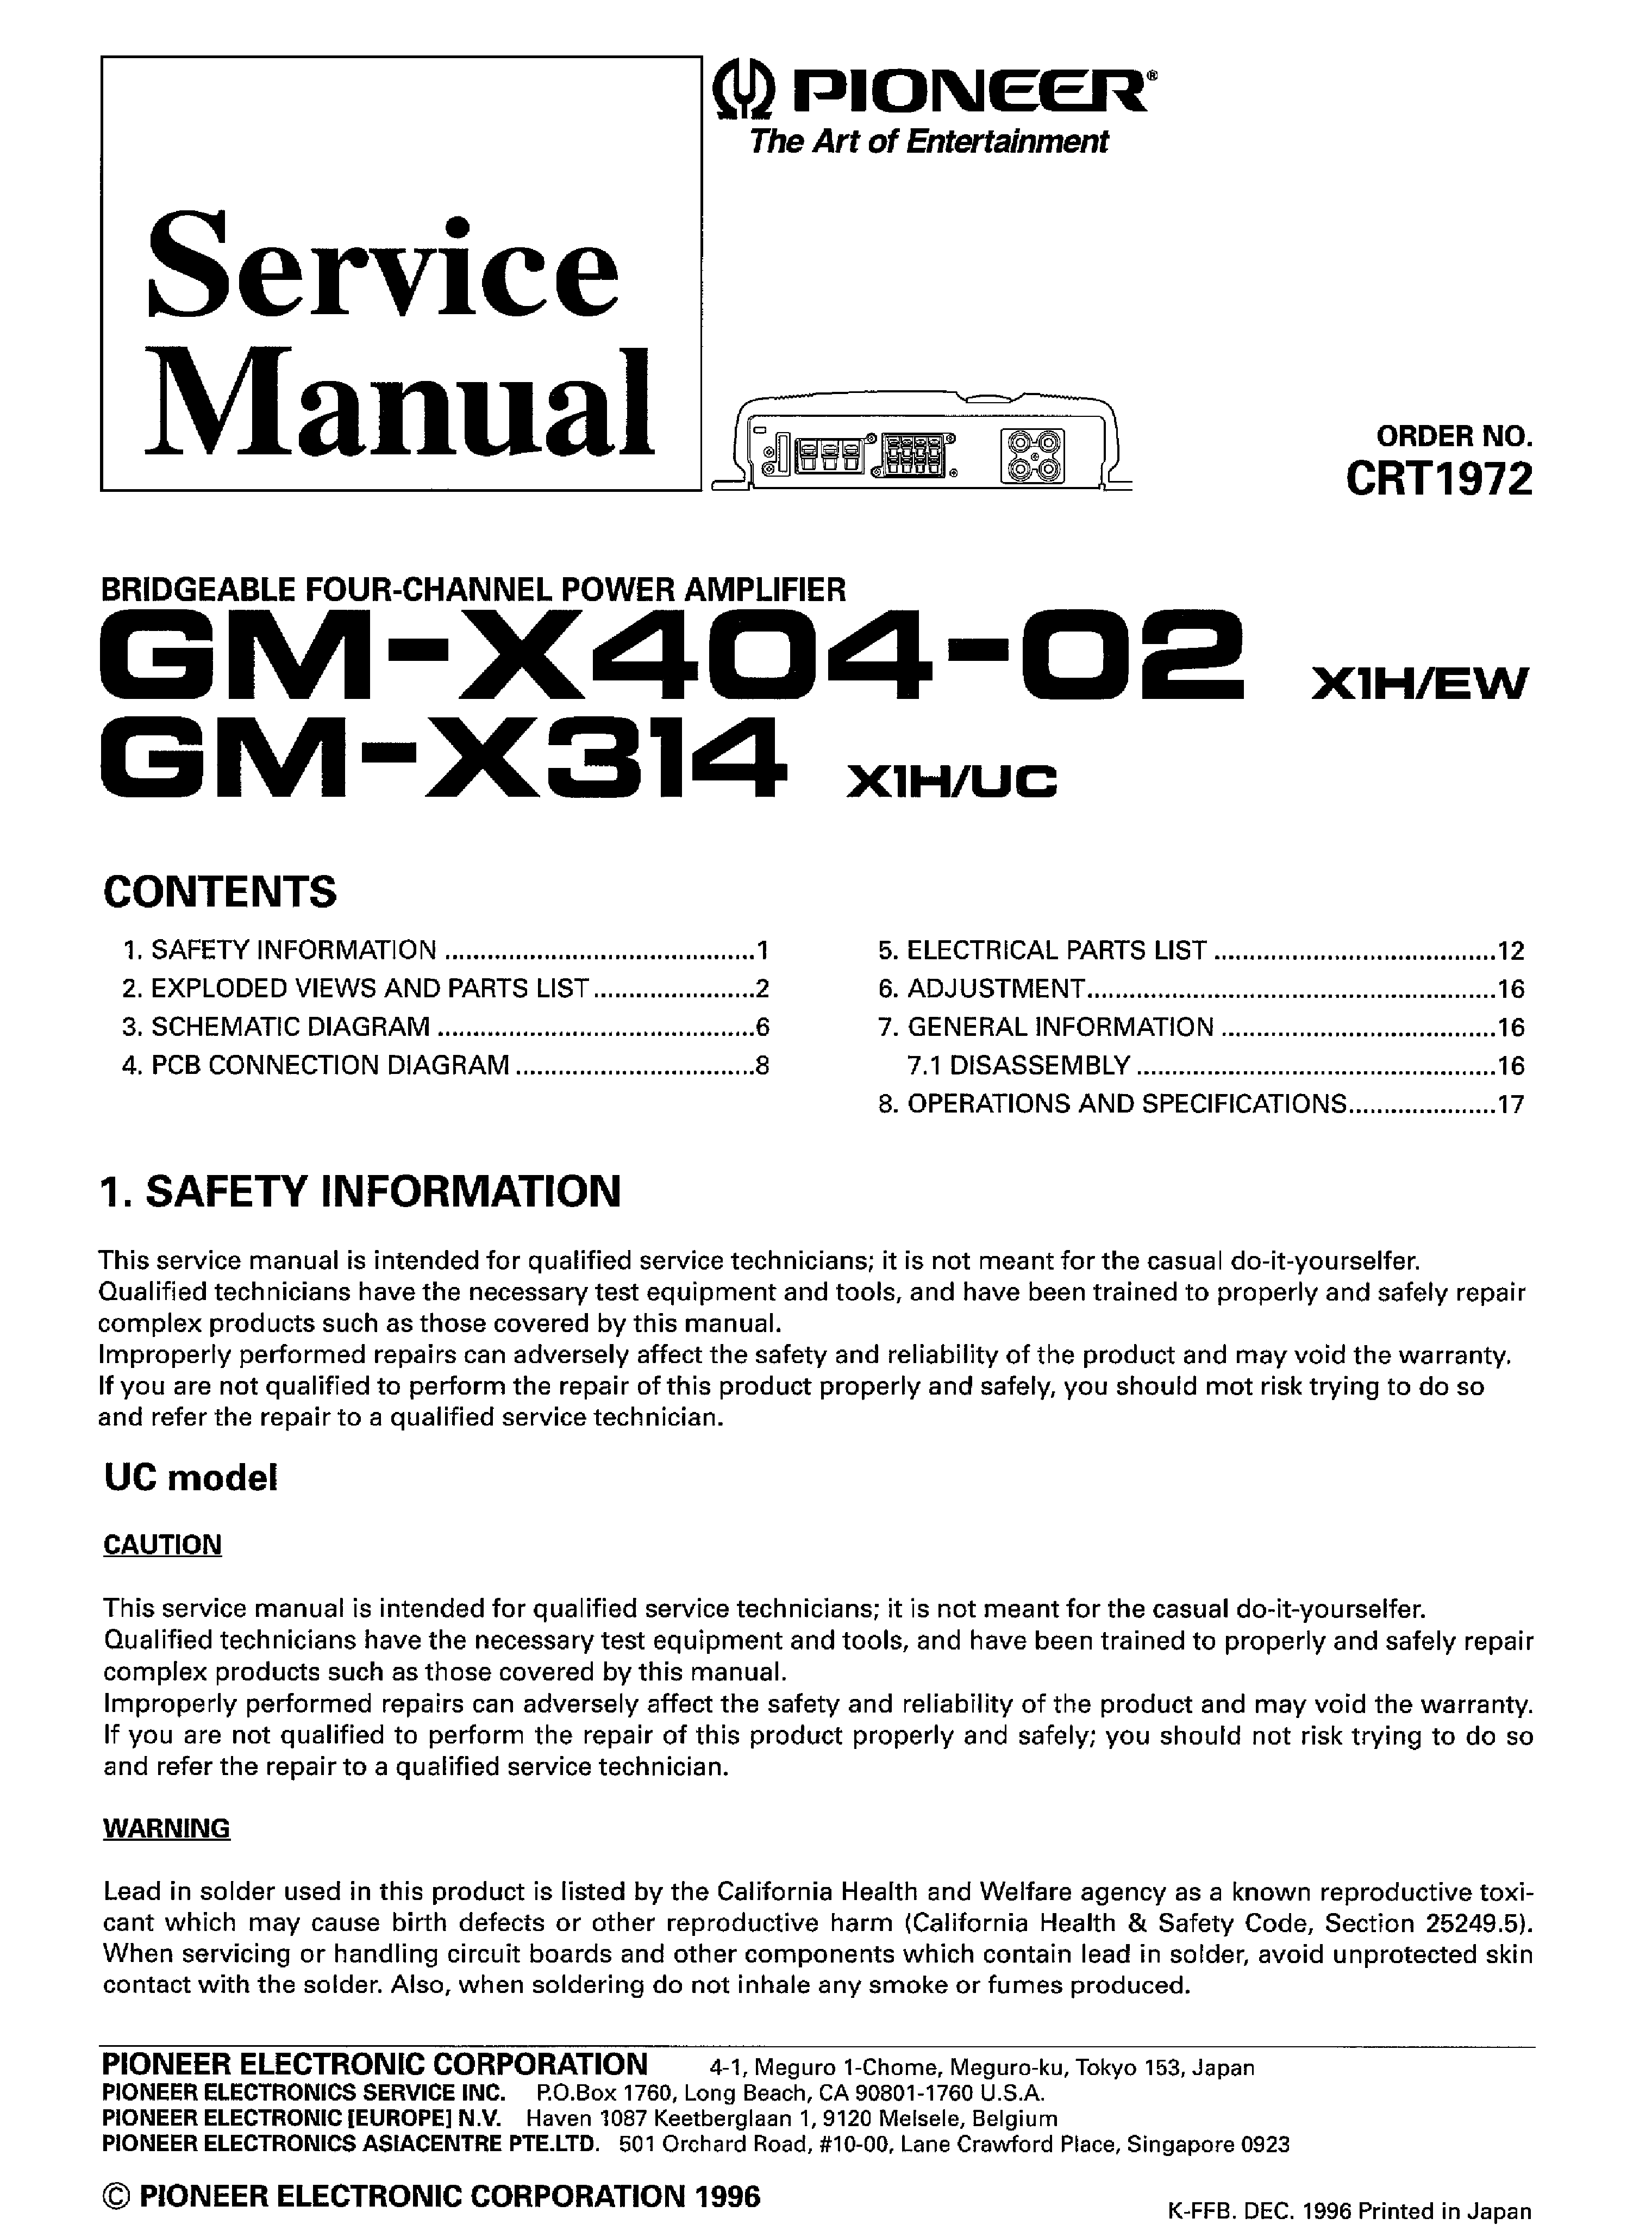 PIONEER GM-X314 X404-02 SM service manual (1st page)